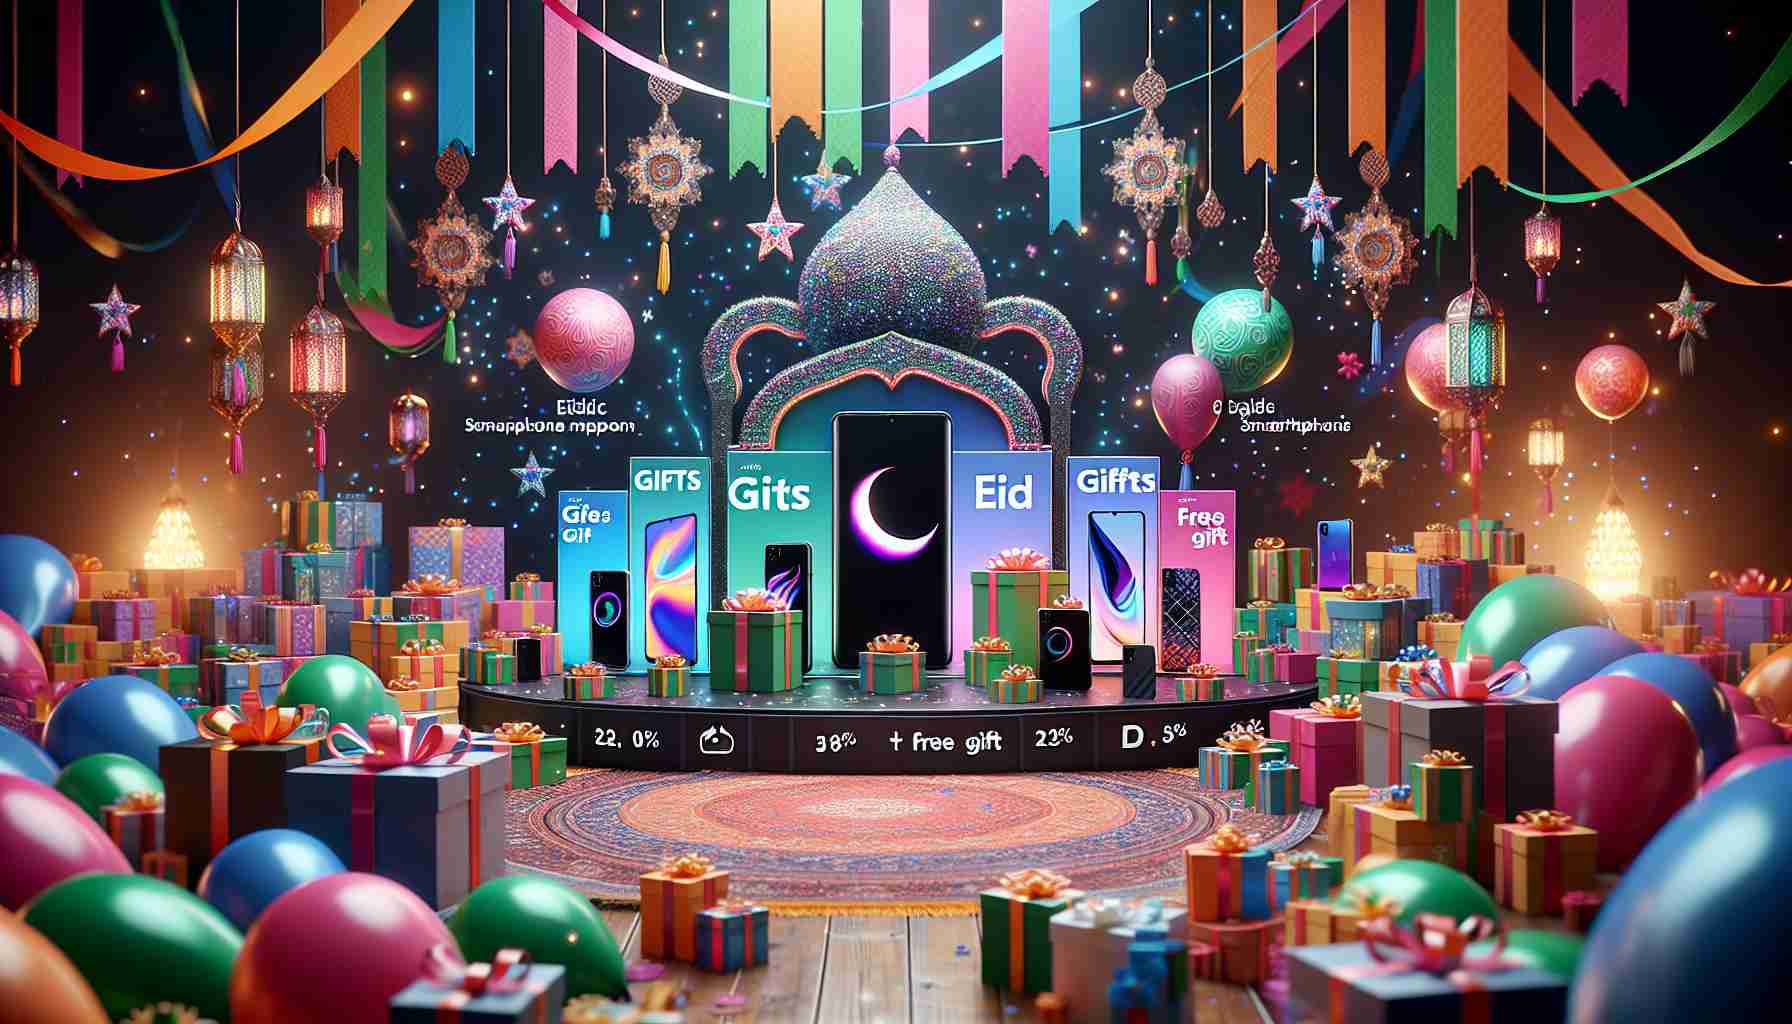 TECNO’s Exciting Eid Offers: Gifts, Discounts, and More on Smartphones